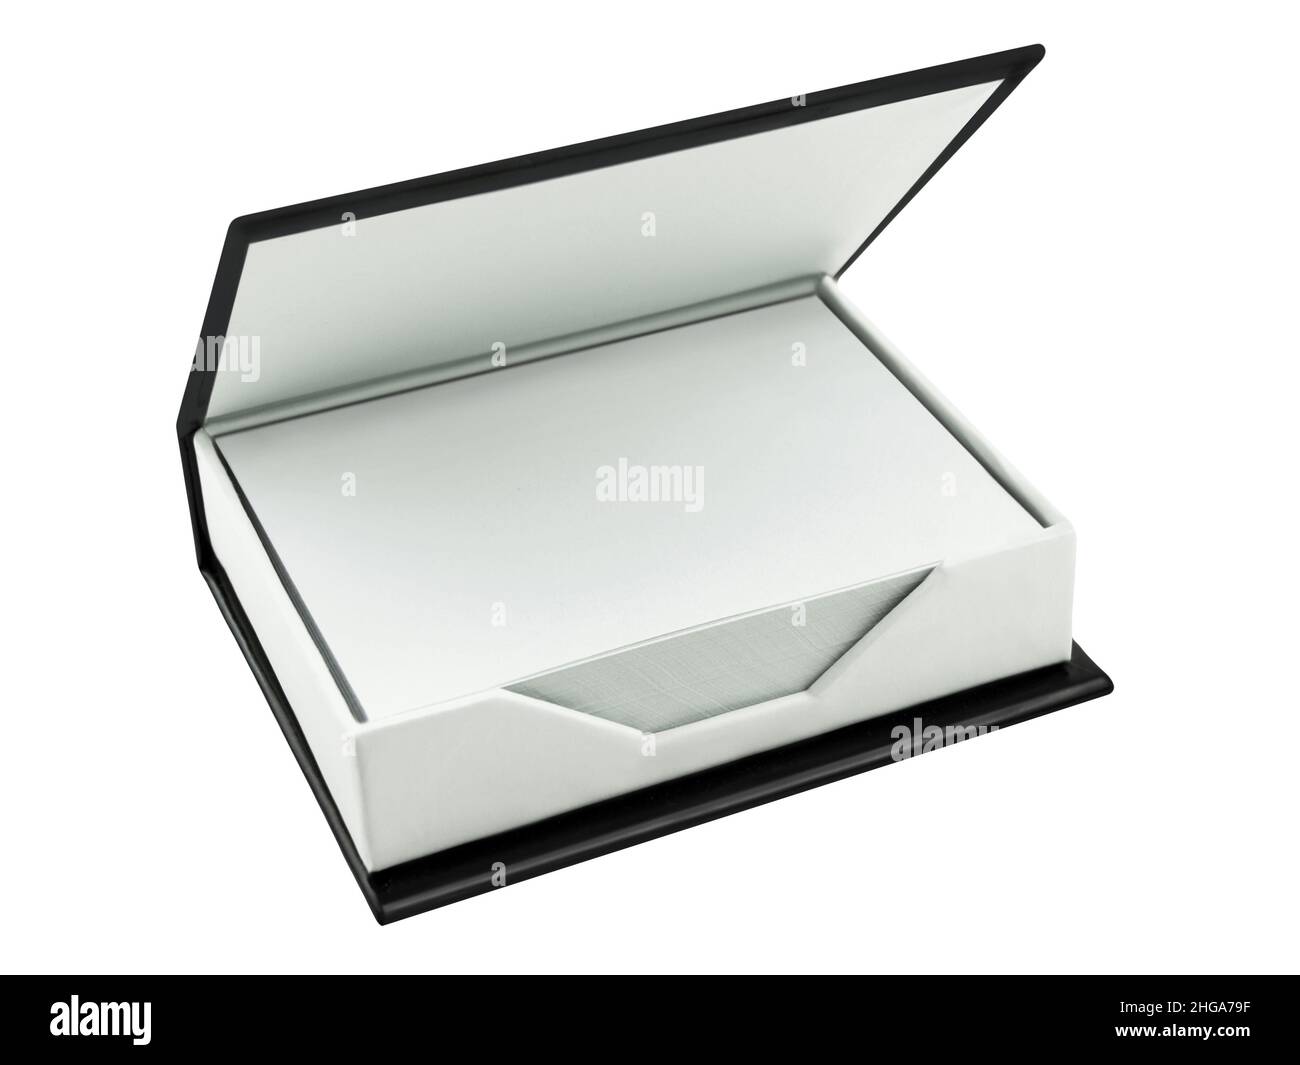 Notepads in a black box isolated against white background Stock Photo